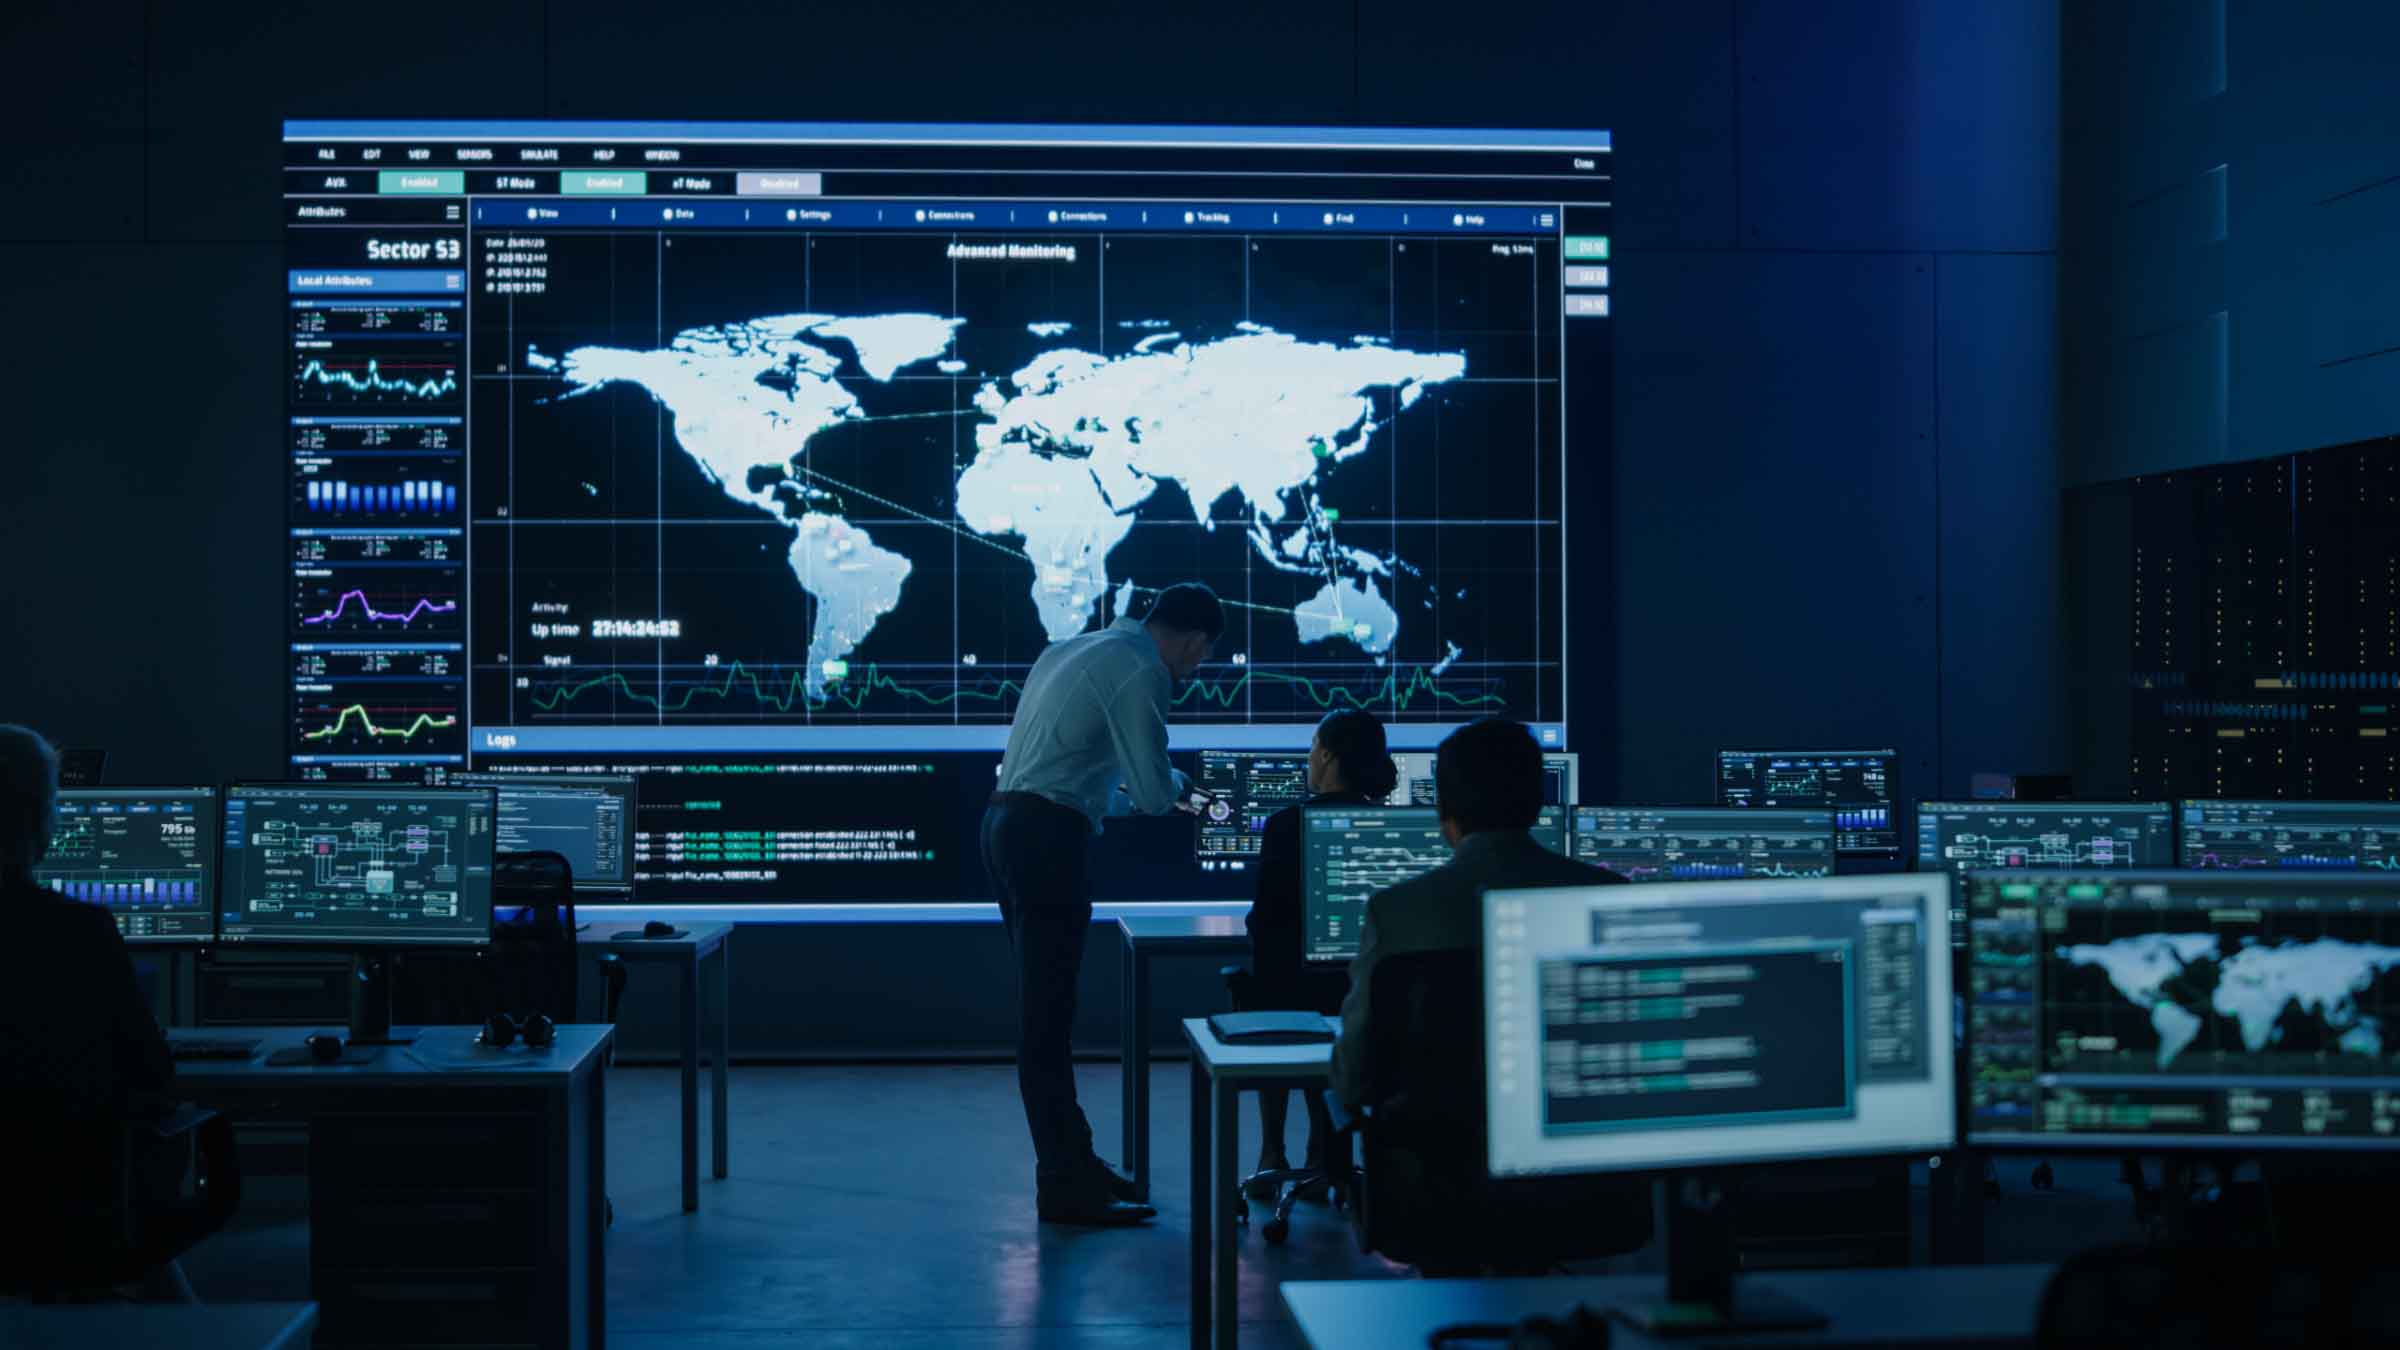 People around computers in control room, demonstrating By Light's cyber capabilities